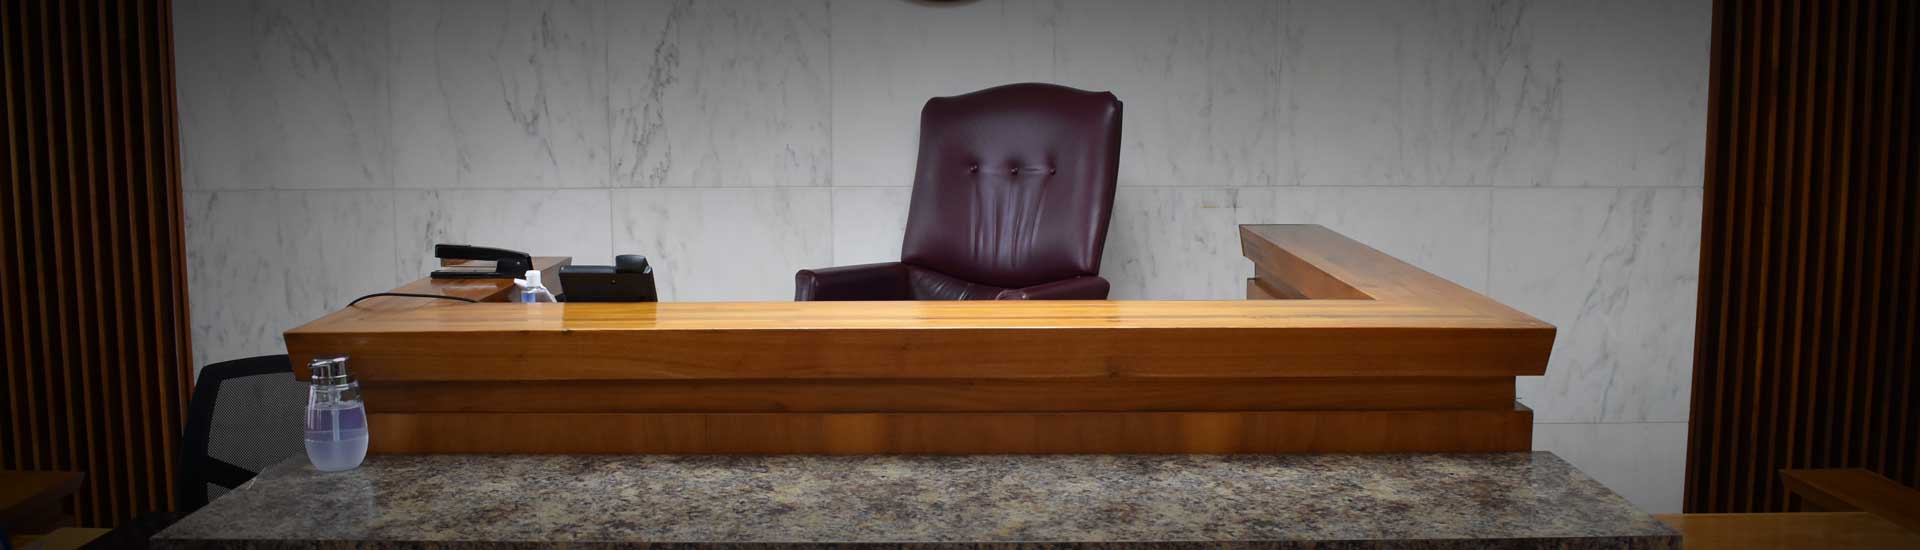 Cullman County Distric Courtroom Bench